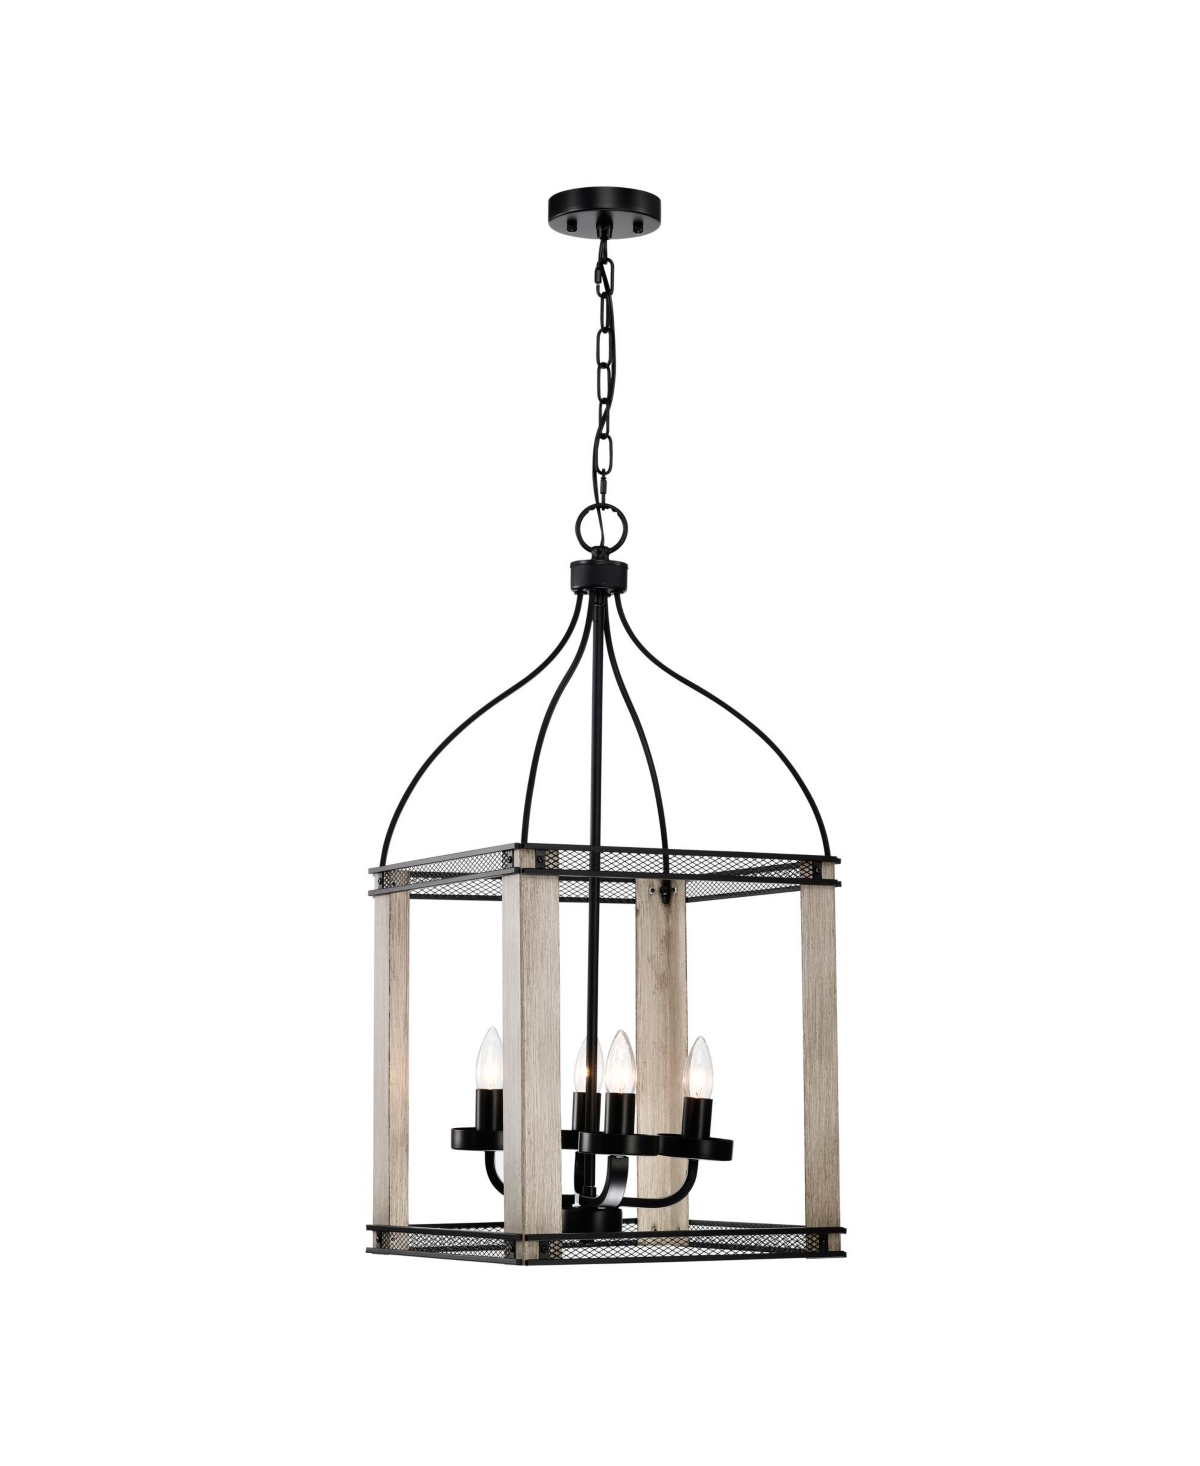 Home Accessories Vander 14" 4-light Indoor Finish Chandelier With Light Kit In Matte Black And Faux Wood Grain